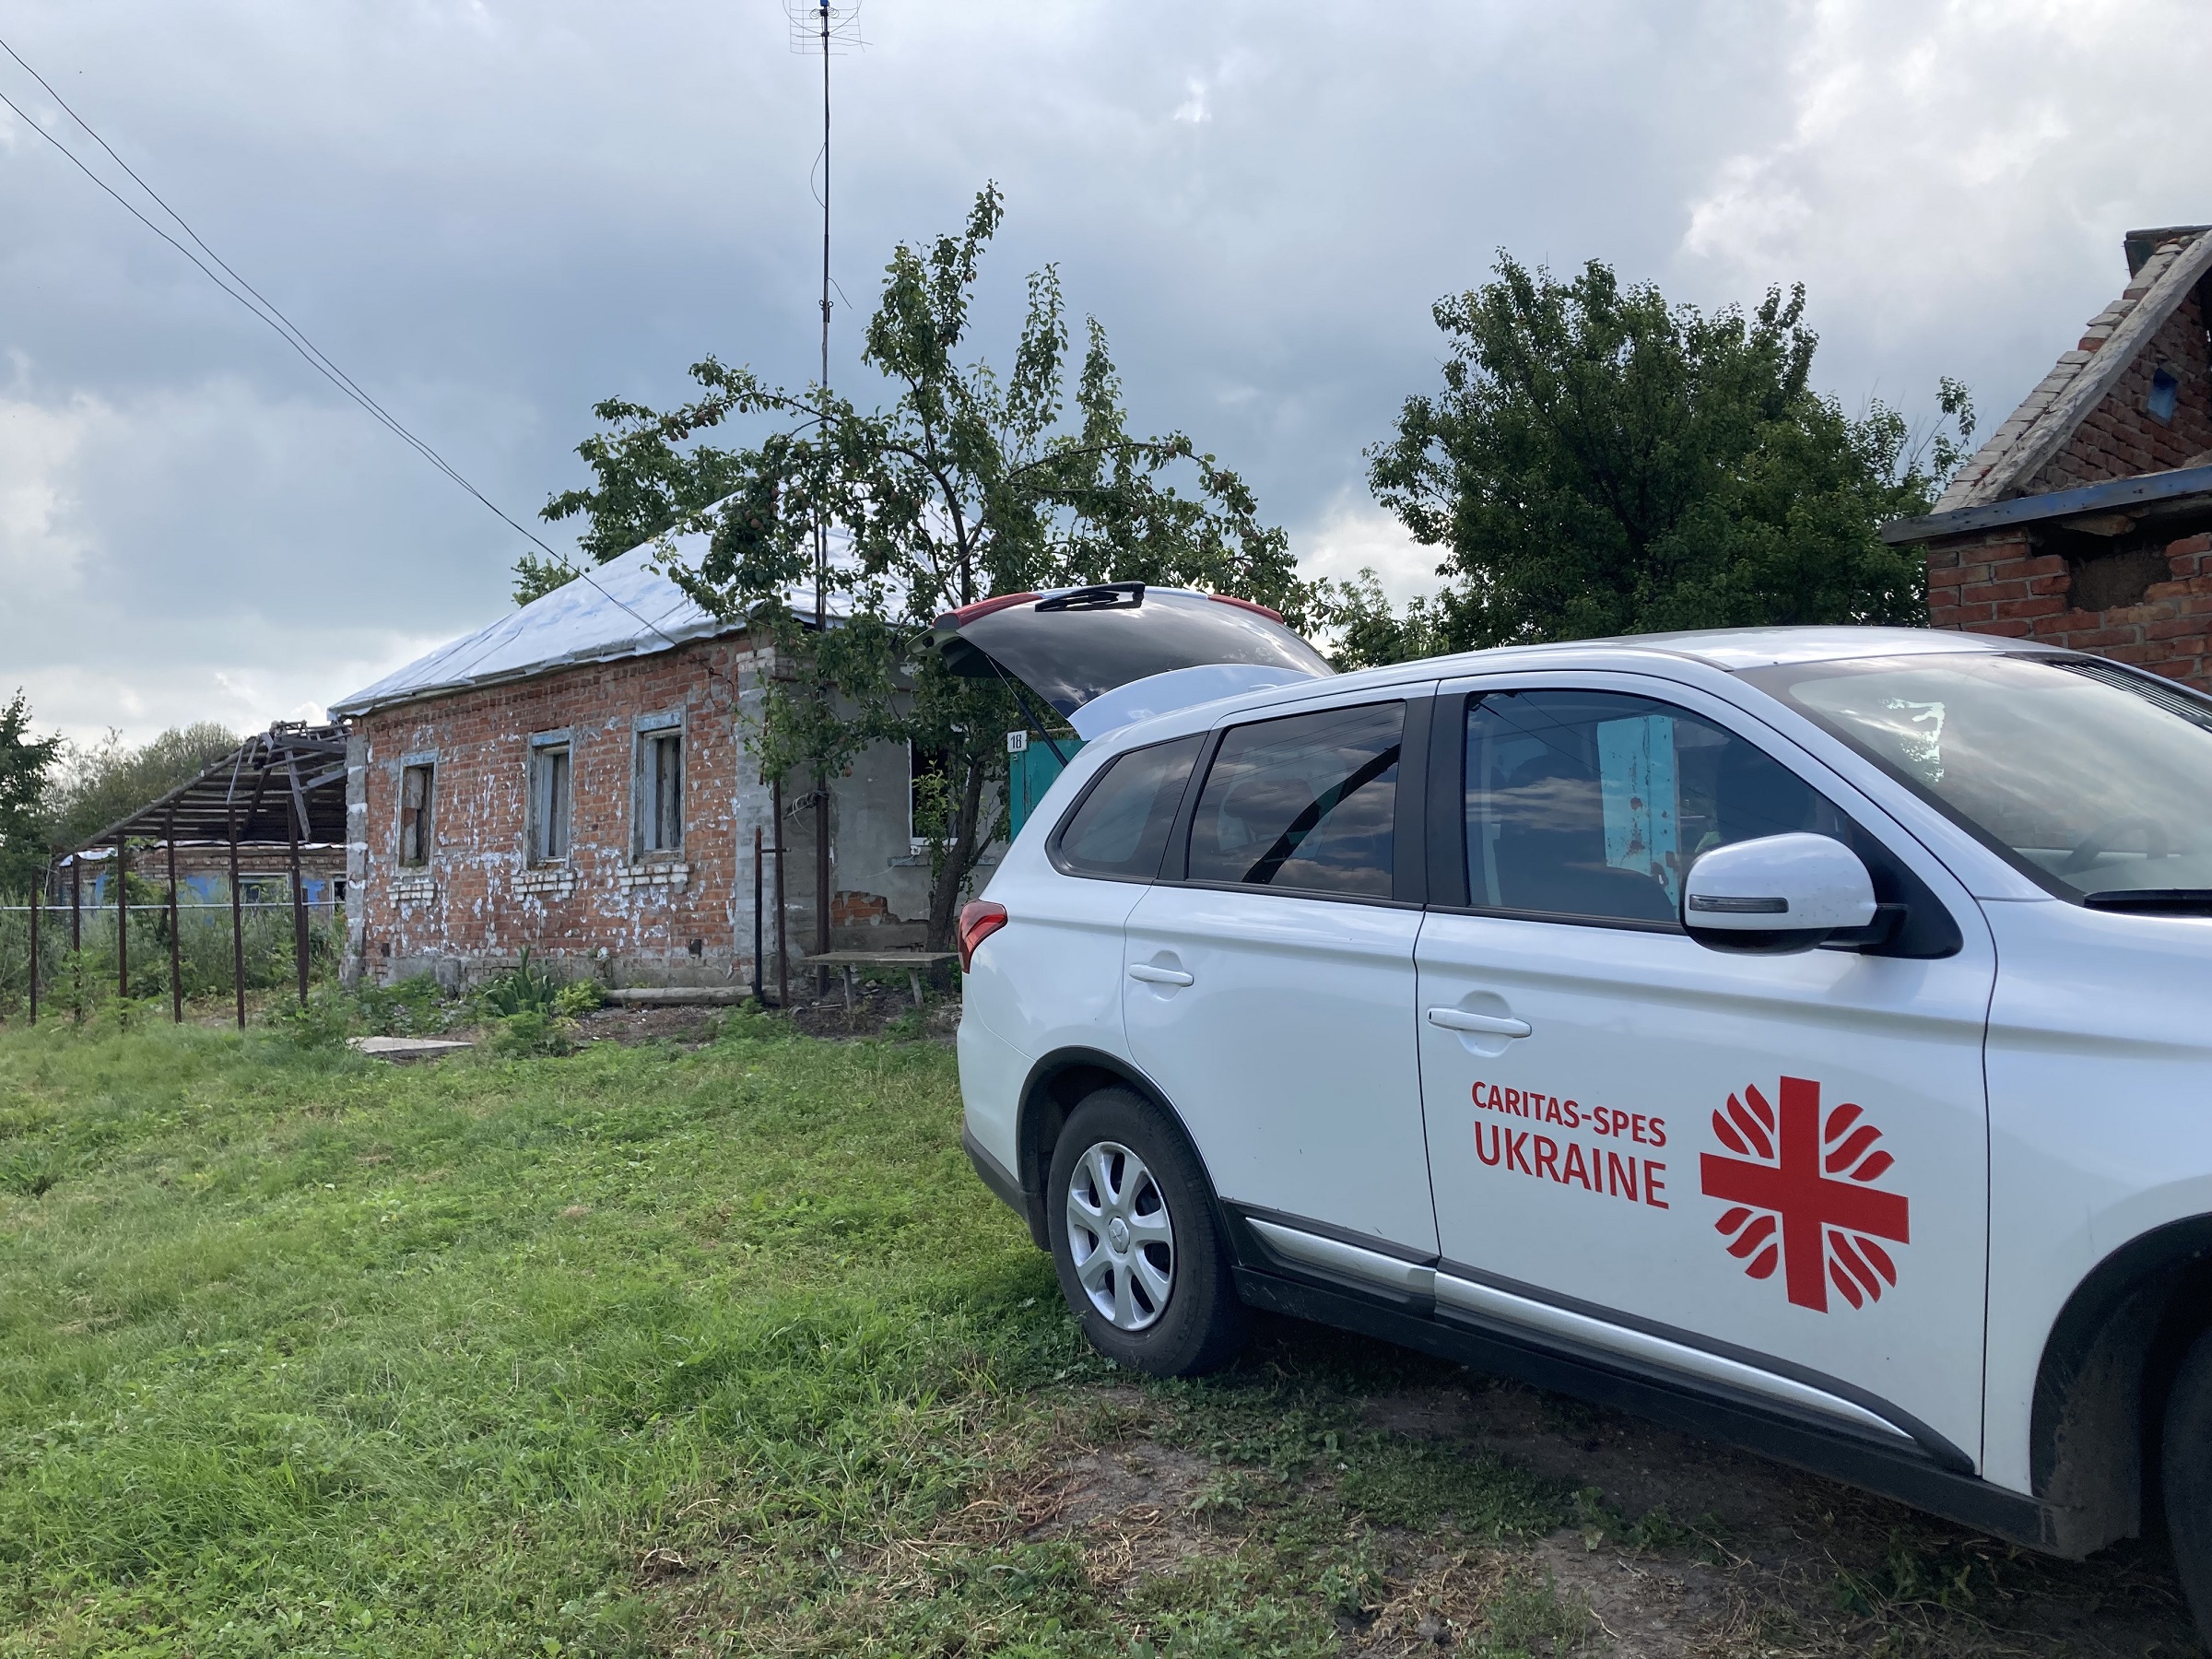 The car of Caritas Spes is parked outside a house in one of the villages outside Kharkiv